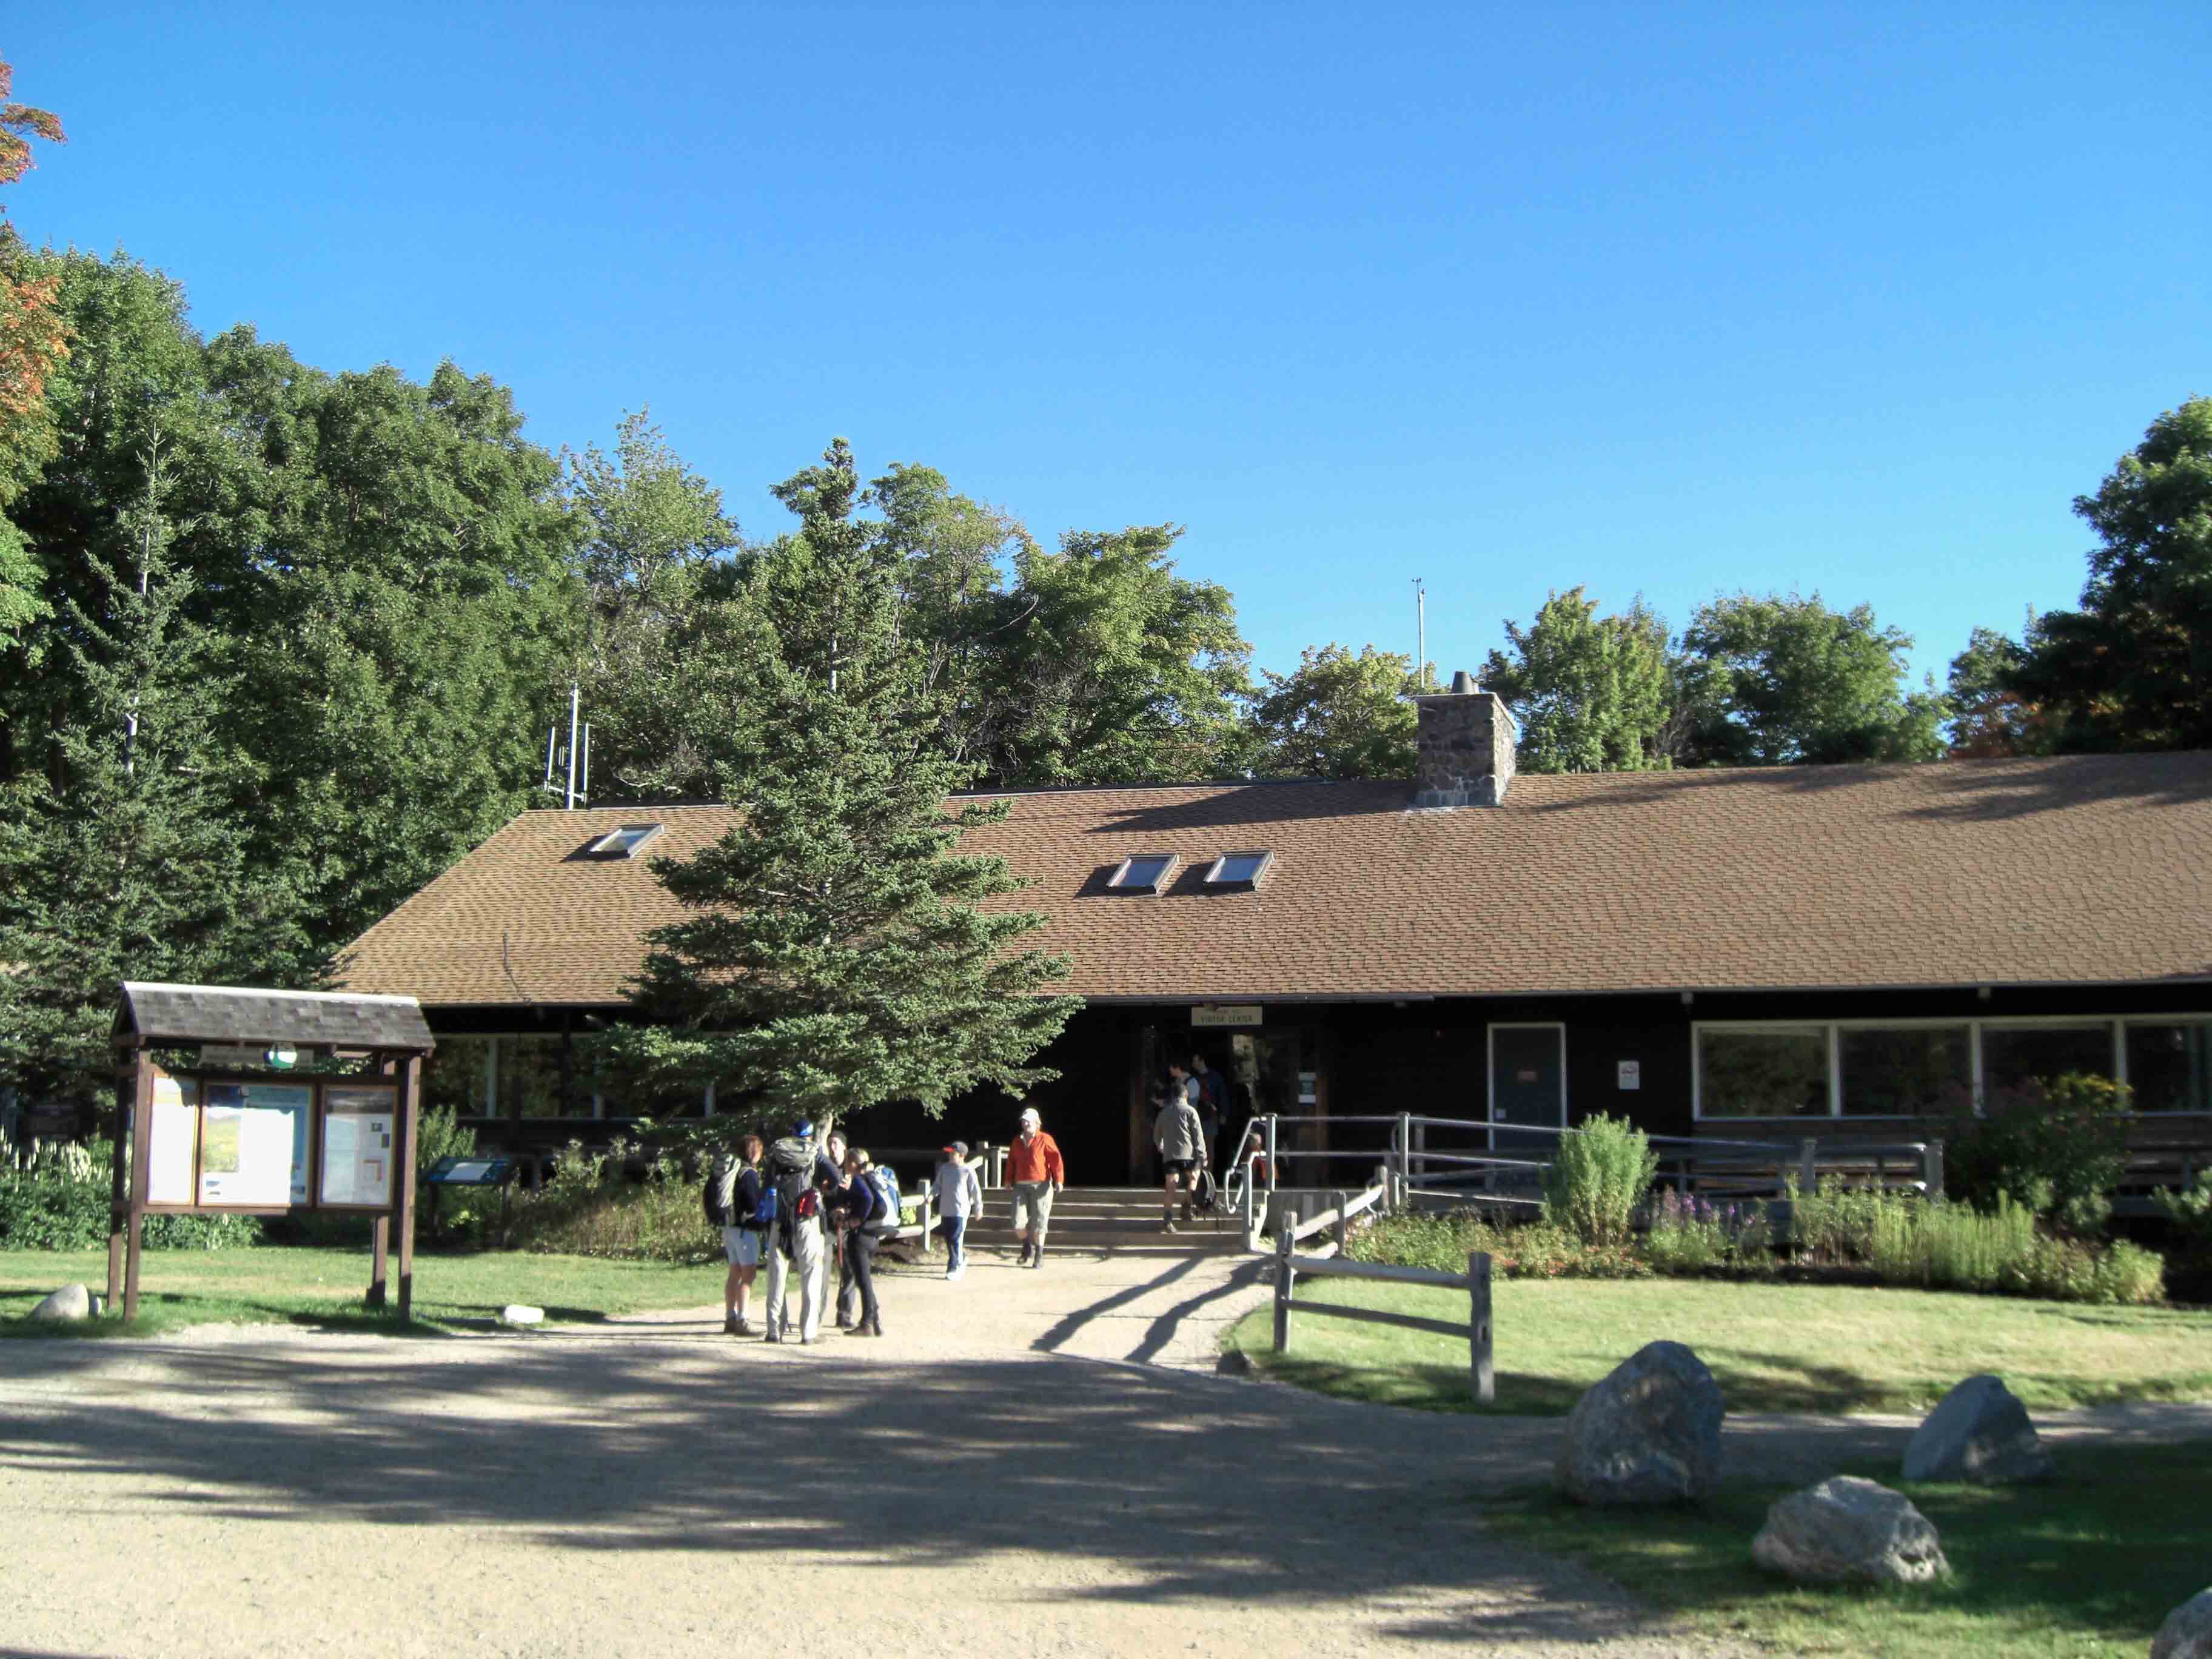 MM 0.0 - Pinkham Notch Visitor Center. The AT passes right in front of this.  Courtesy seqatt.net@sbcglobal.net